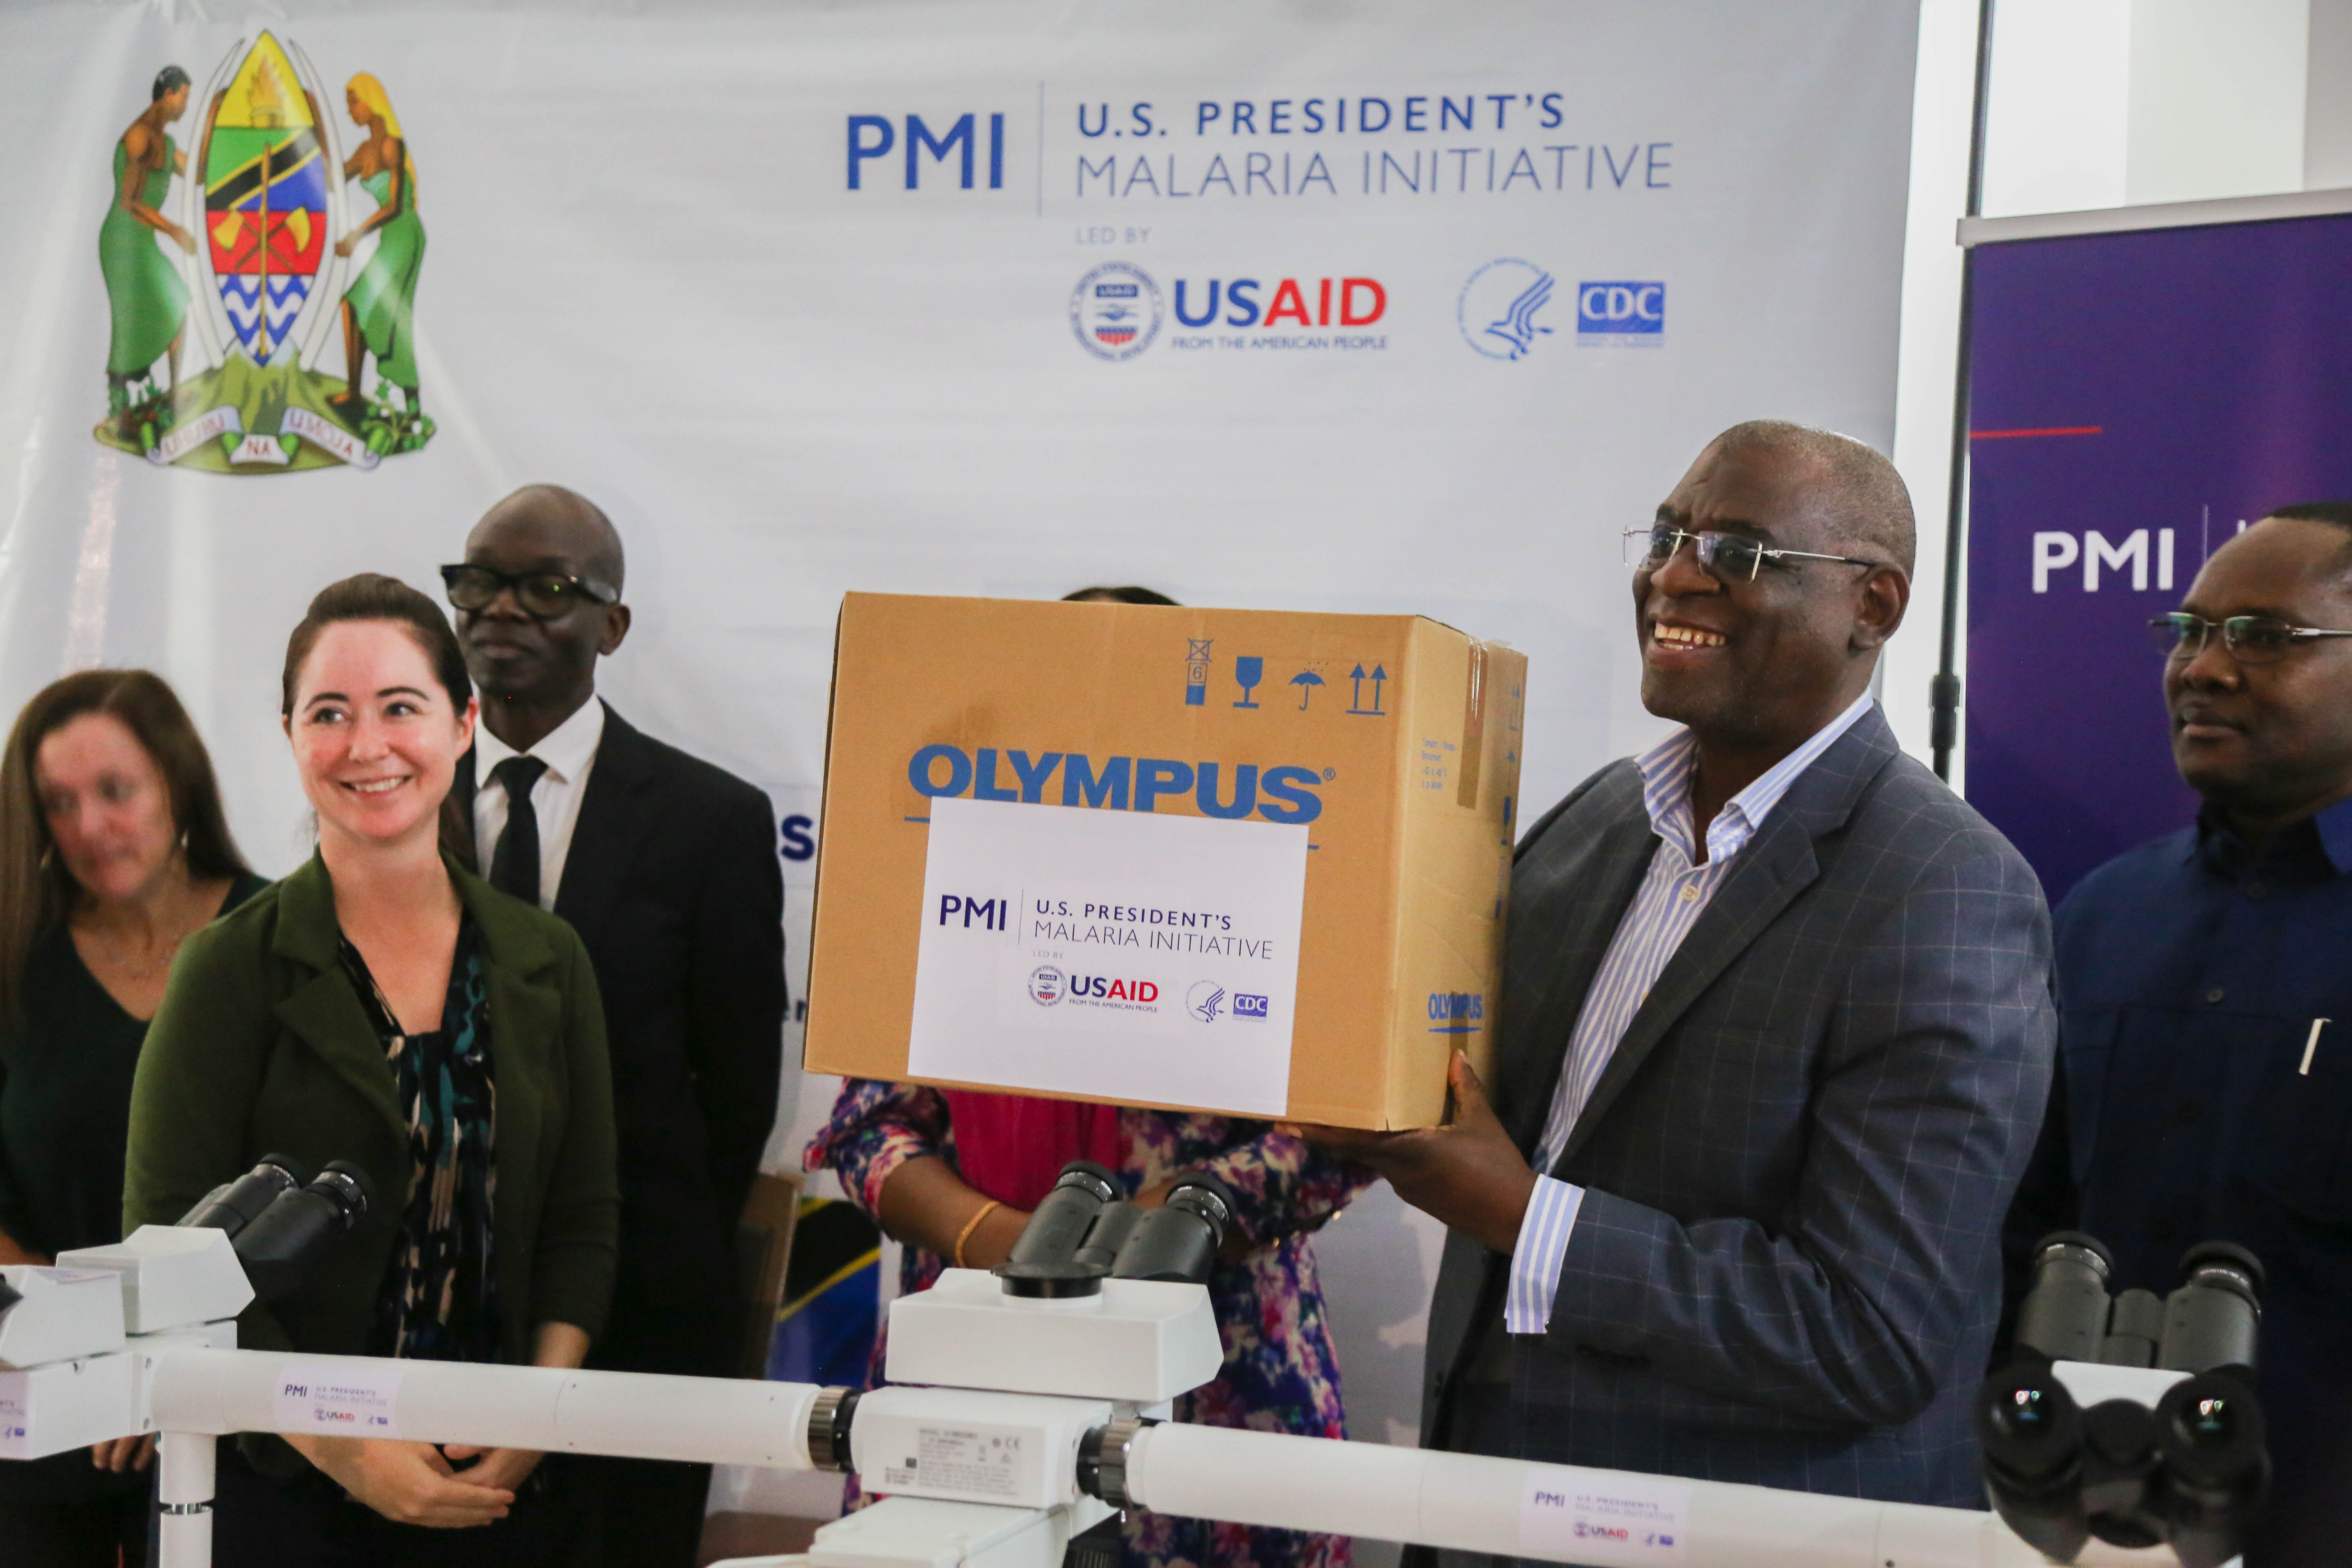 HANDOVER: Research institutions receive microscopes worth over 1bn/- from US government